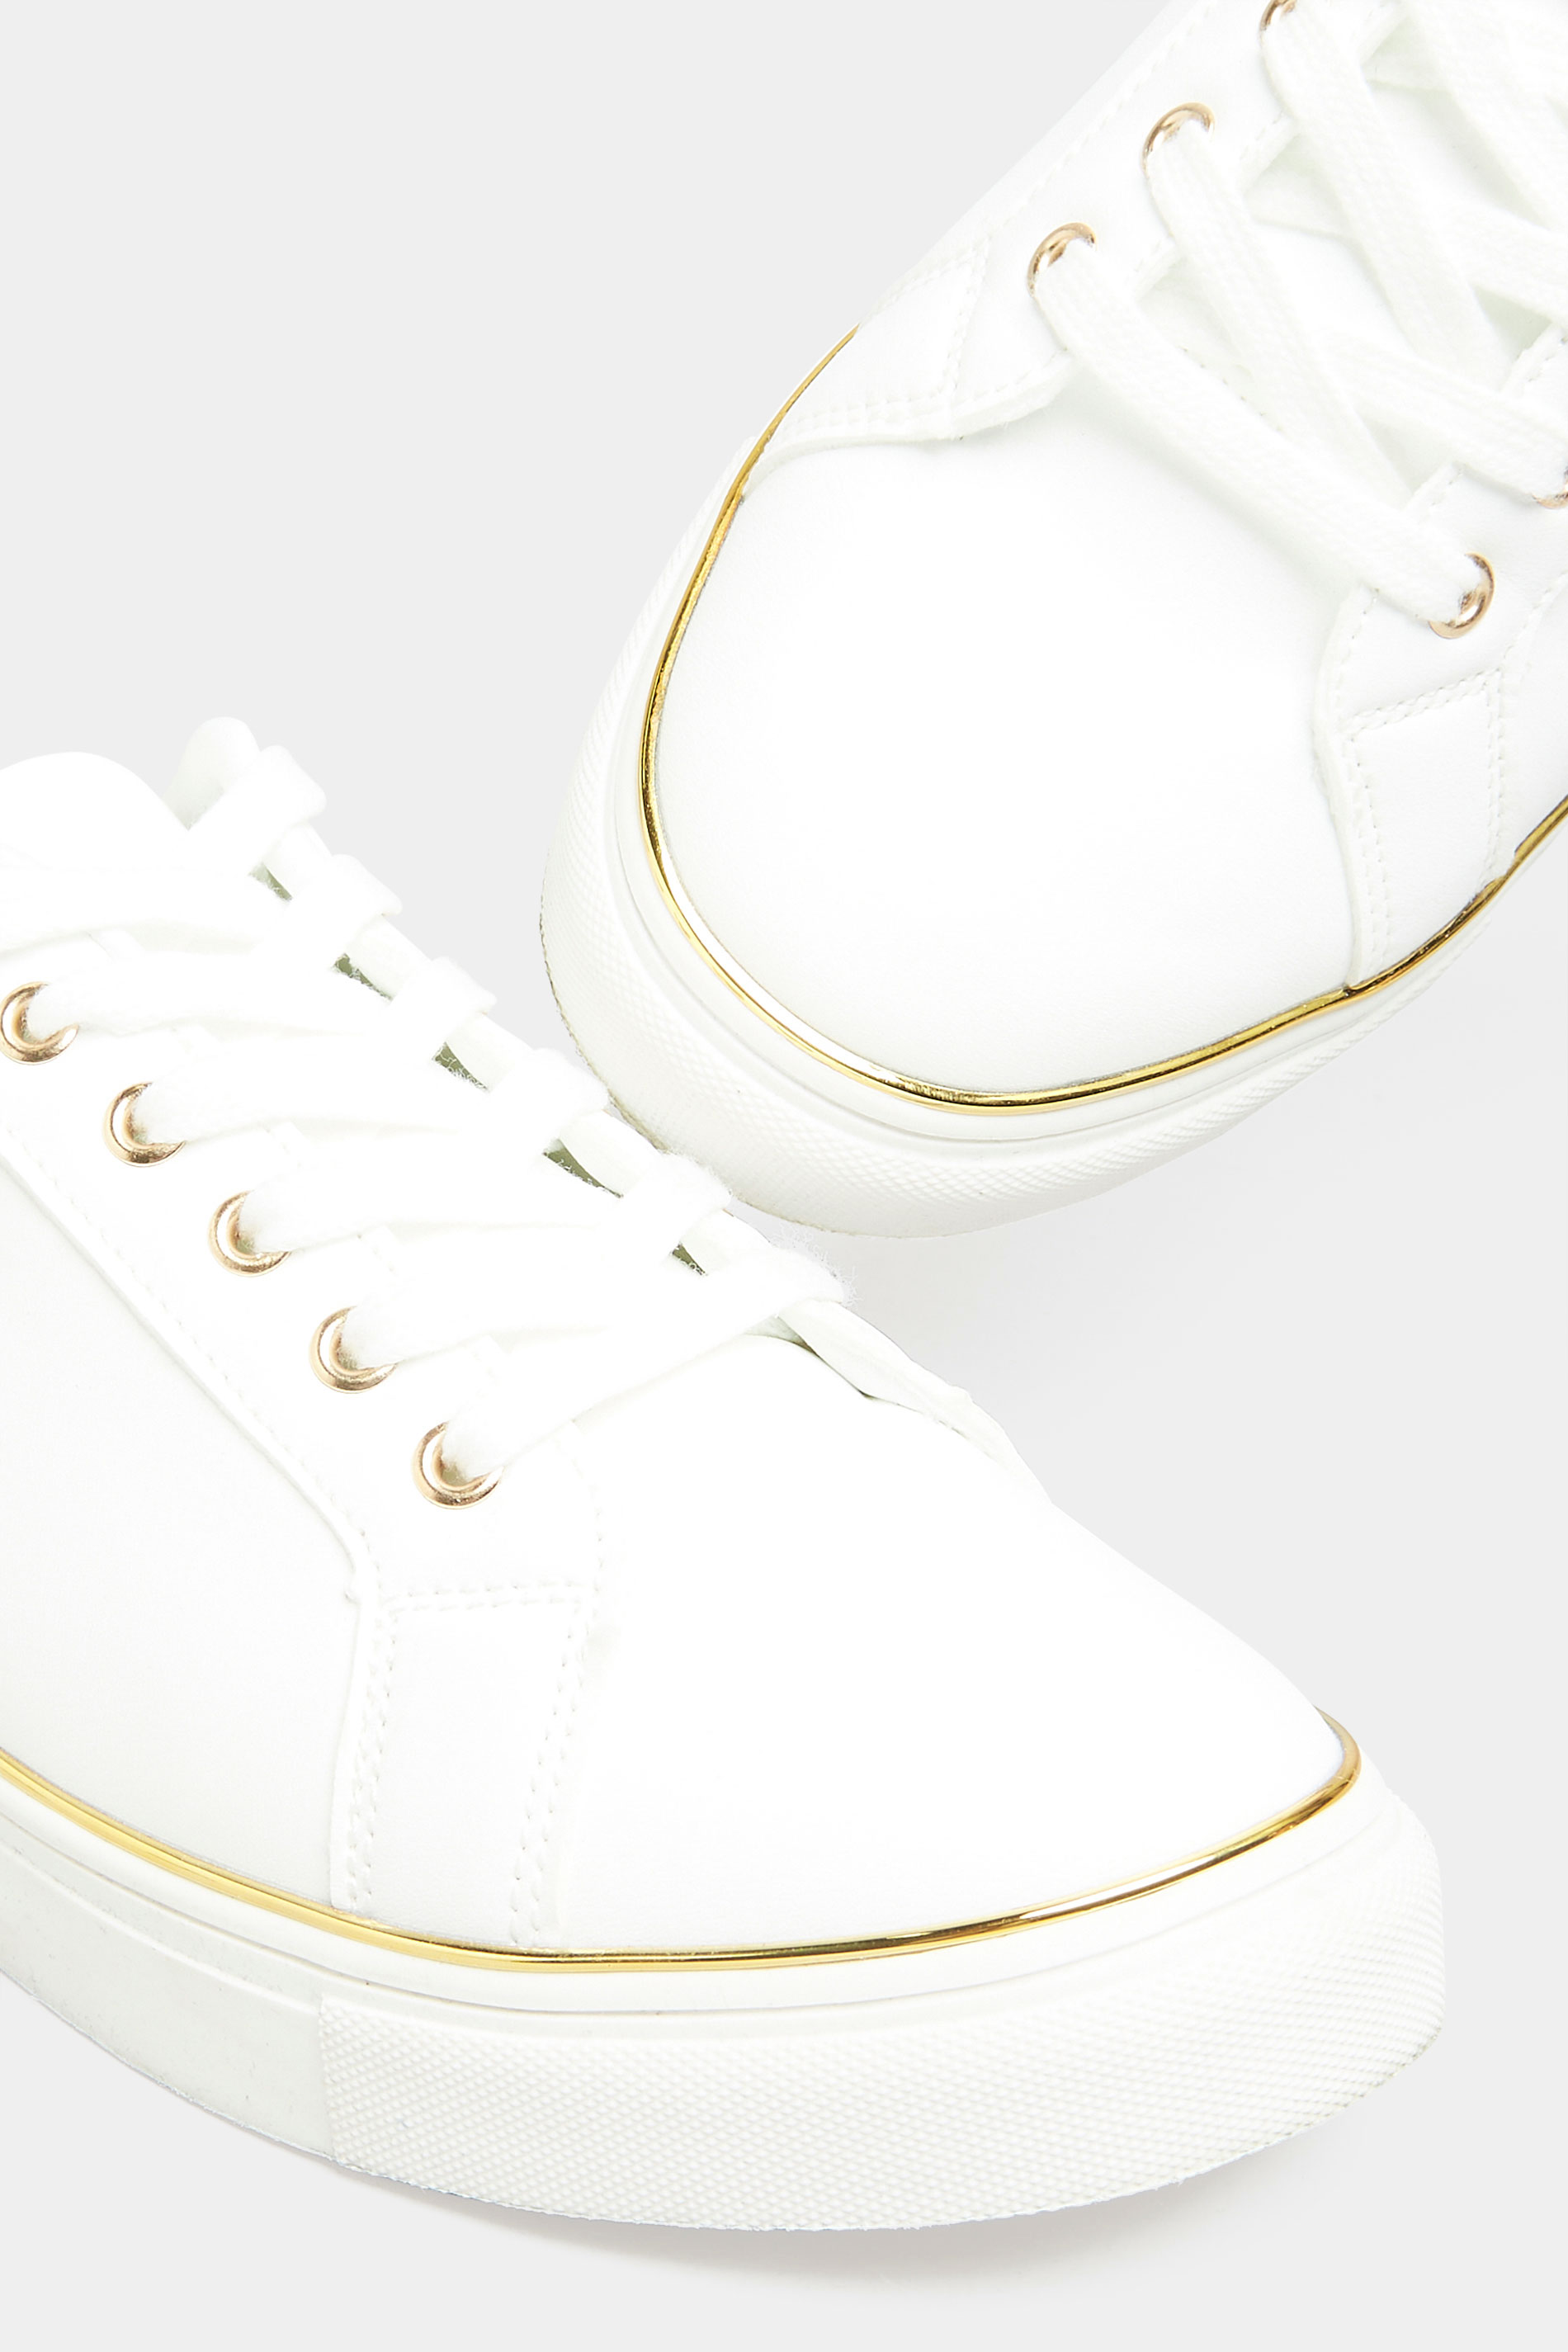 Chaussures Pieds Larges Tennis & Baskets (Regular Fit & Pieds Larges) | Tennis Blanches & Dorées Pieds Extra Larges EEE - DP40601